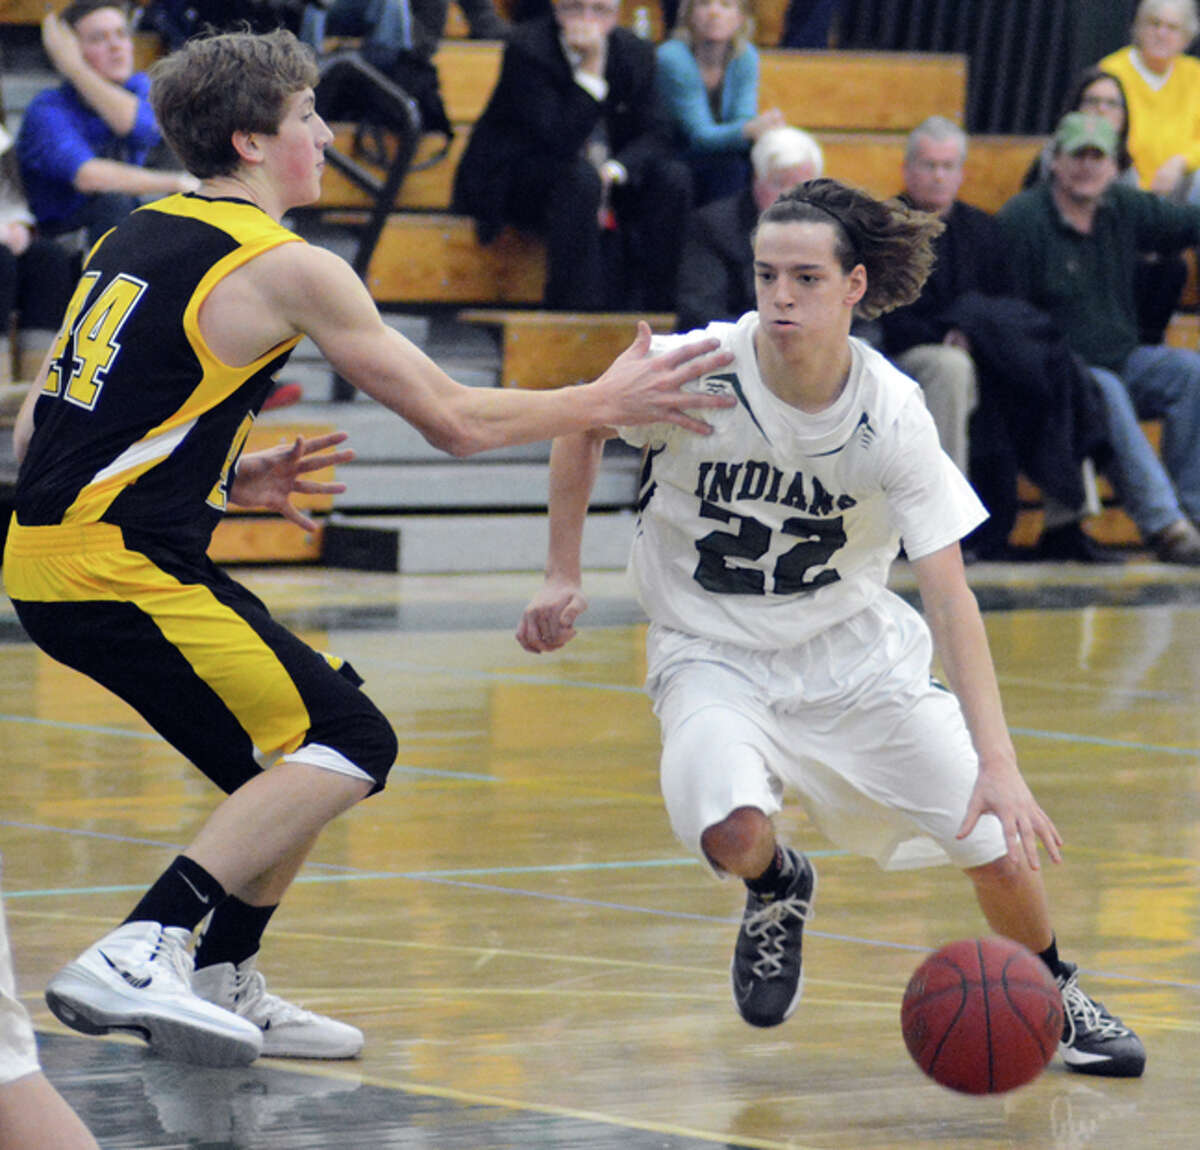 Photo by Dave Phillips/ Guilford’s Shaun Ross looks to dribble past Amity’s Chris Winkel earlier this season.